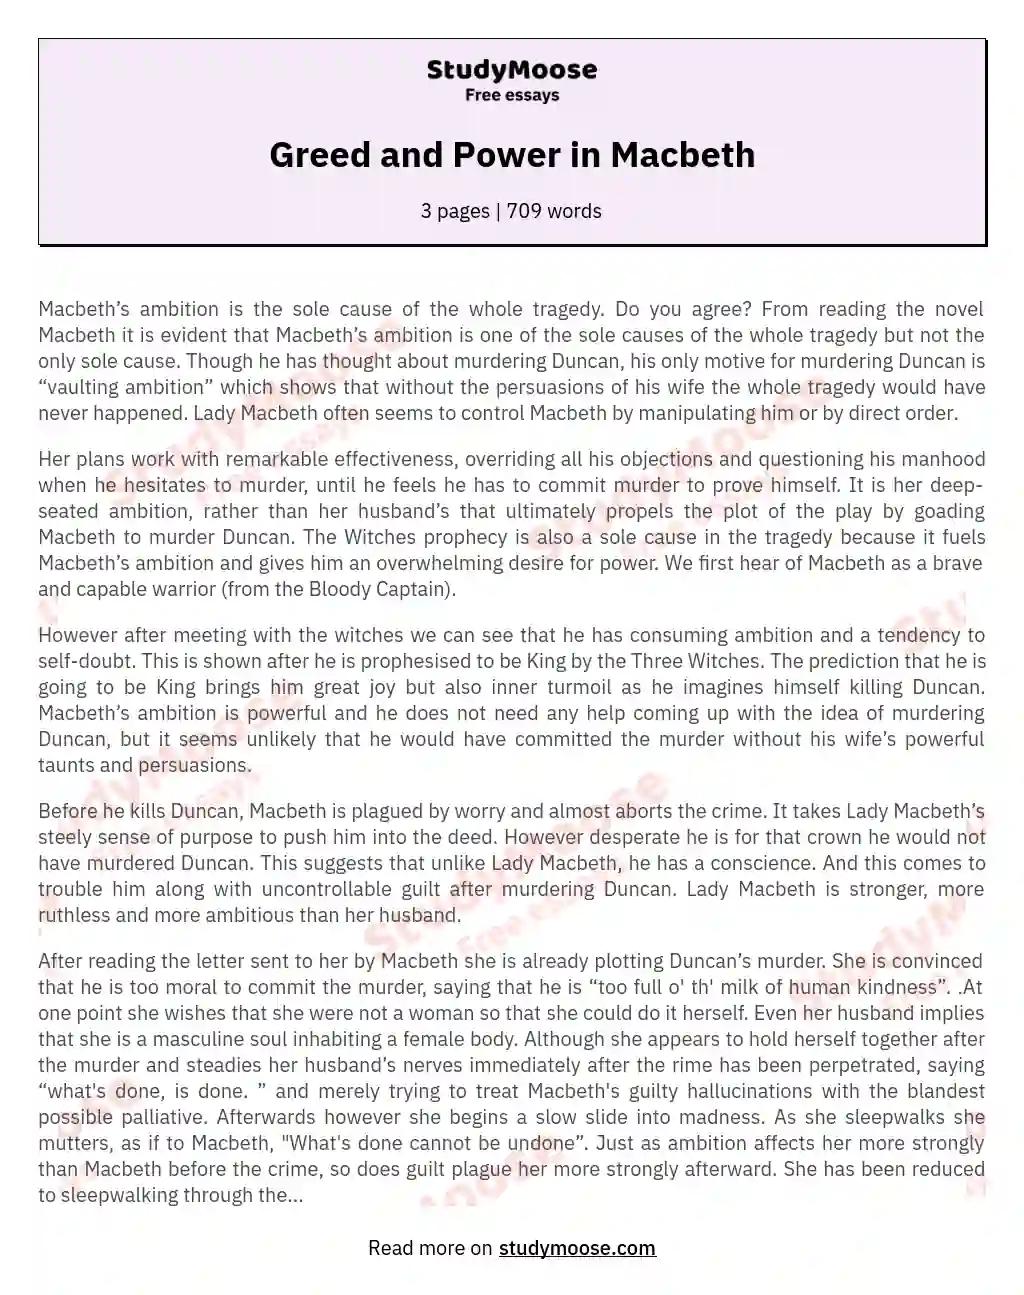 Greed and Power in Macbeth essay